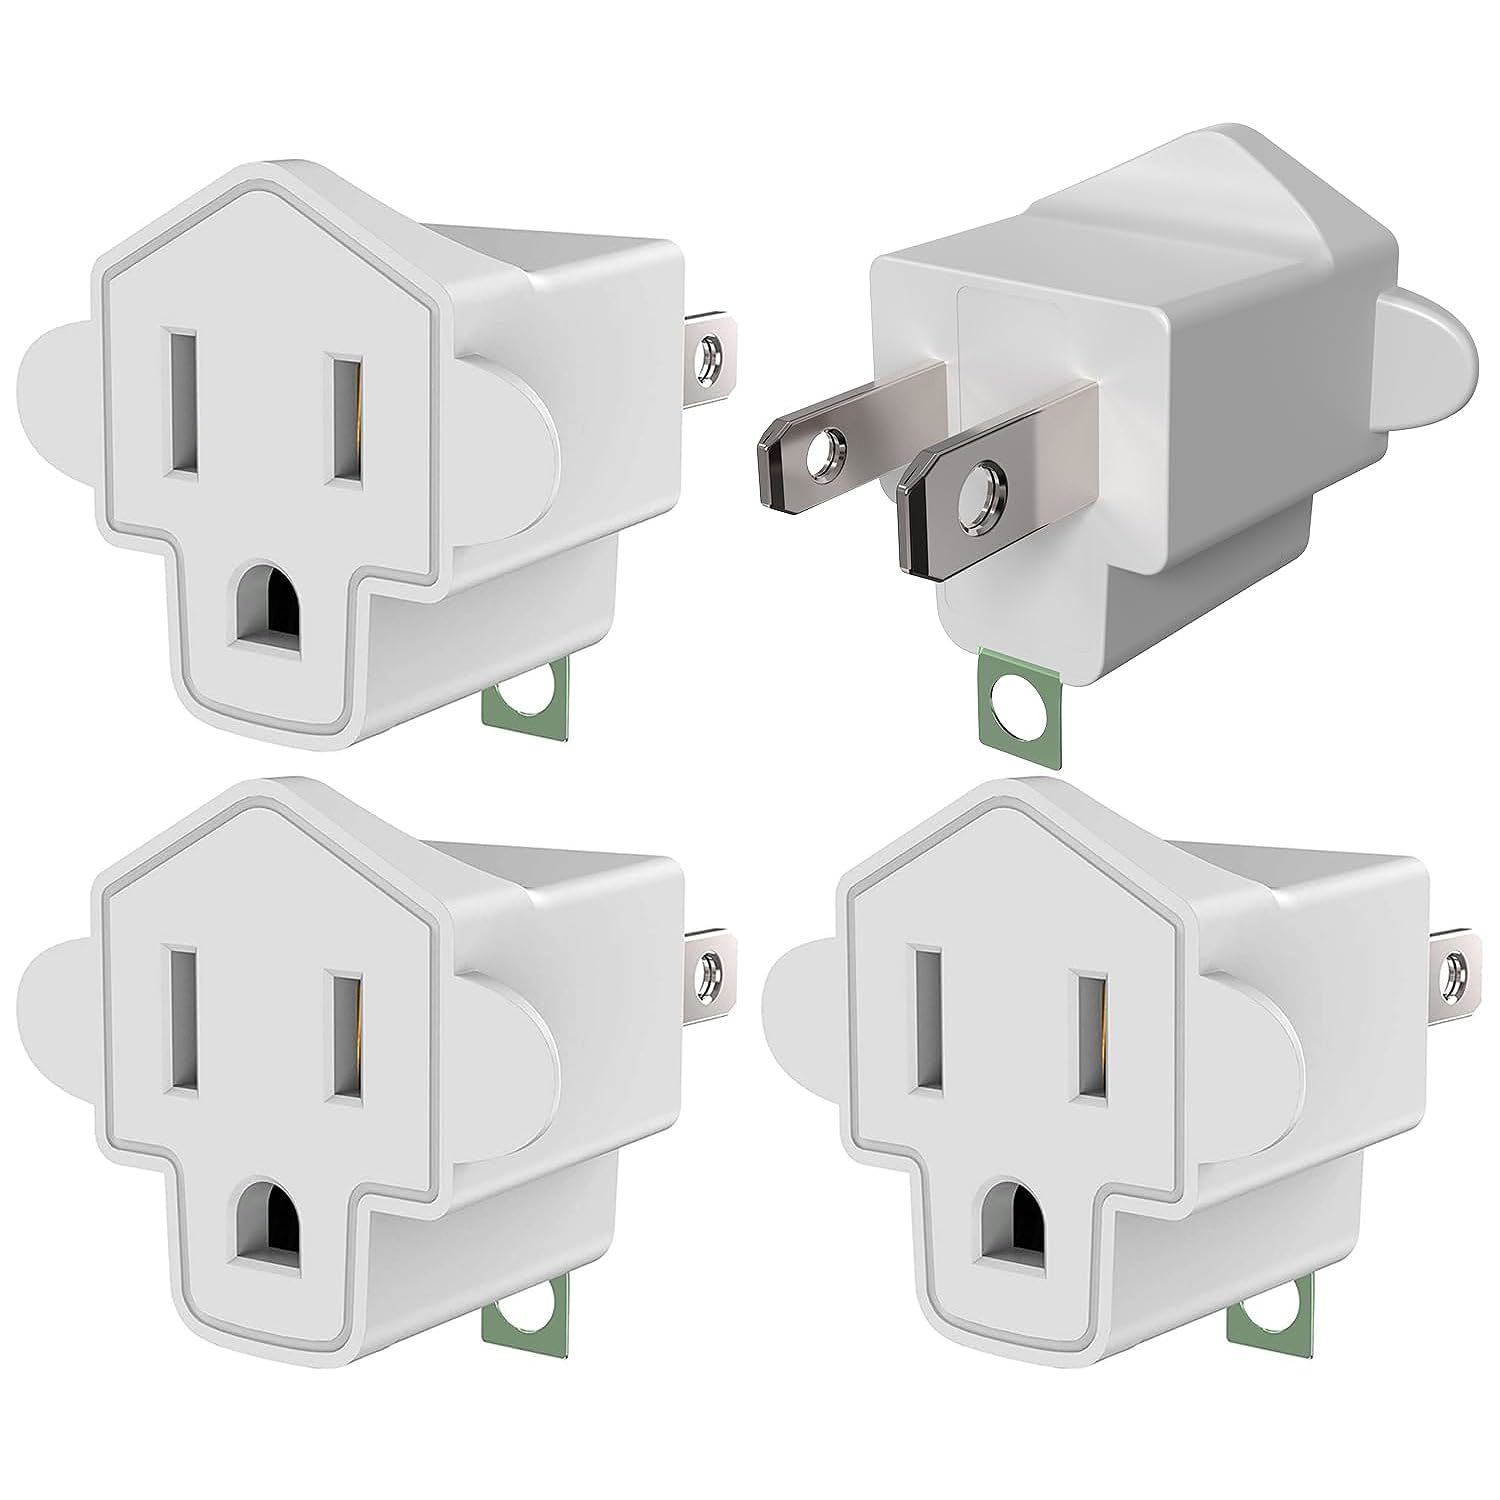 Primary image for 4 Pack Etl Listed Grounding Outlet Adapter, 3-2 Prong Adapter Converter, Portabl